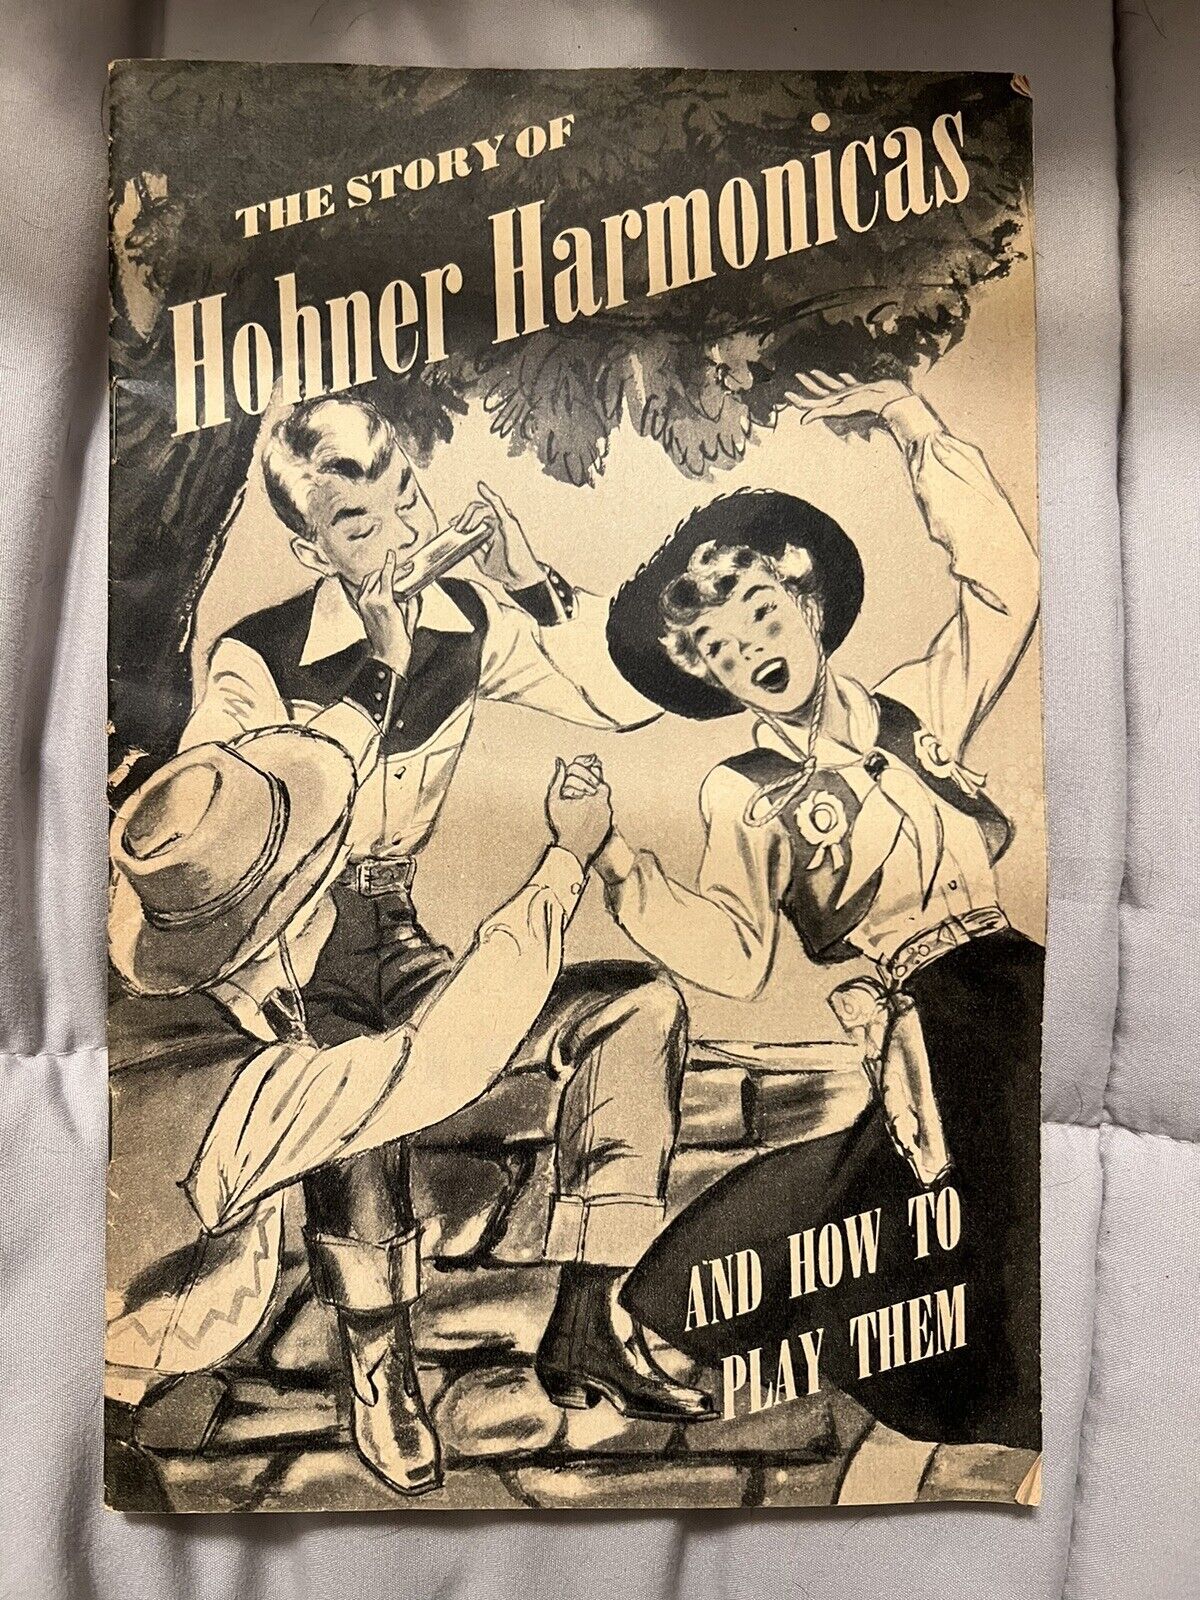 Vintage 1950 The Story of Hohner Harmonicas and How To Play Them Paper Booklet